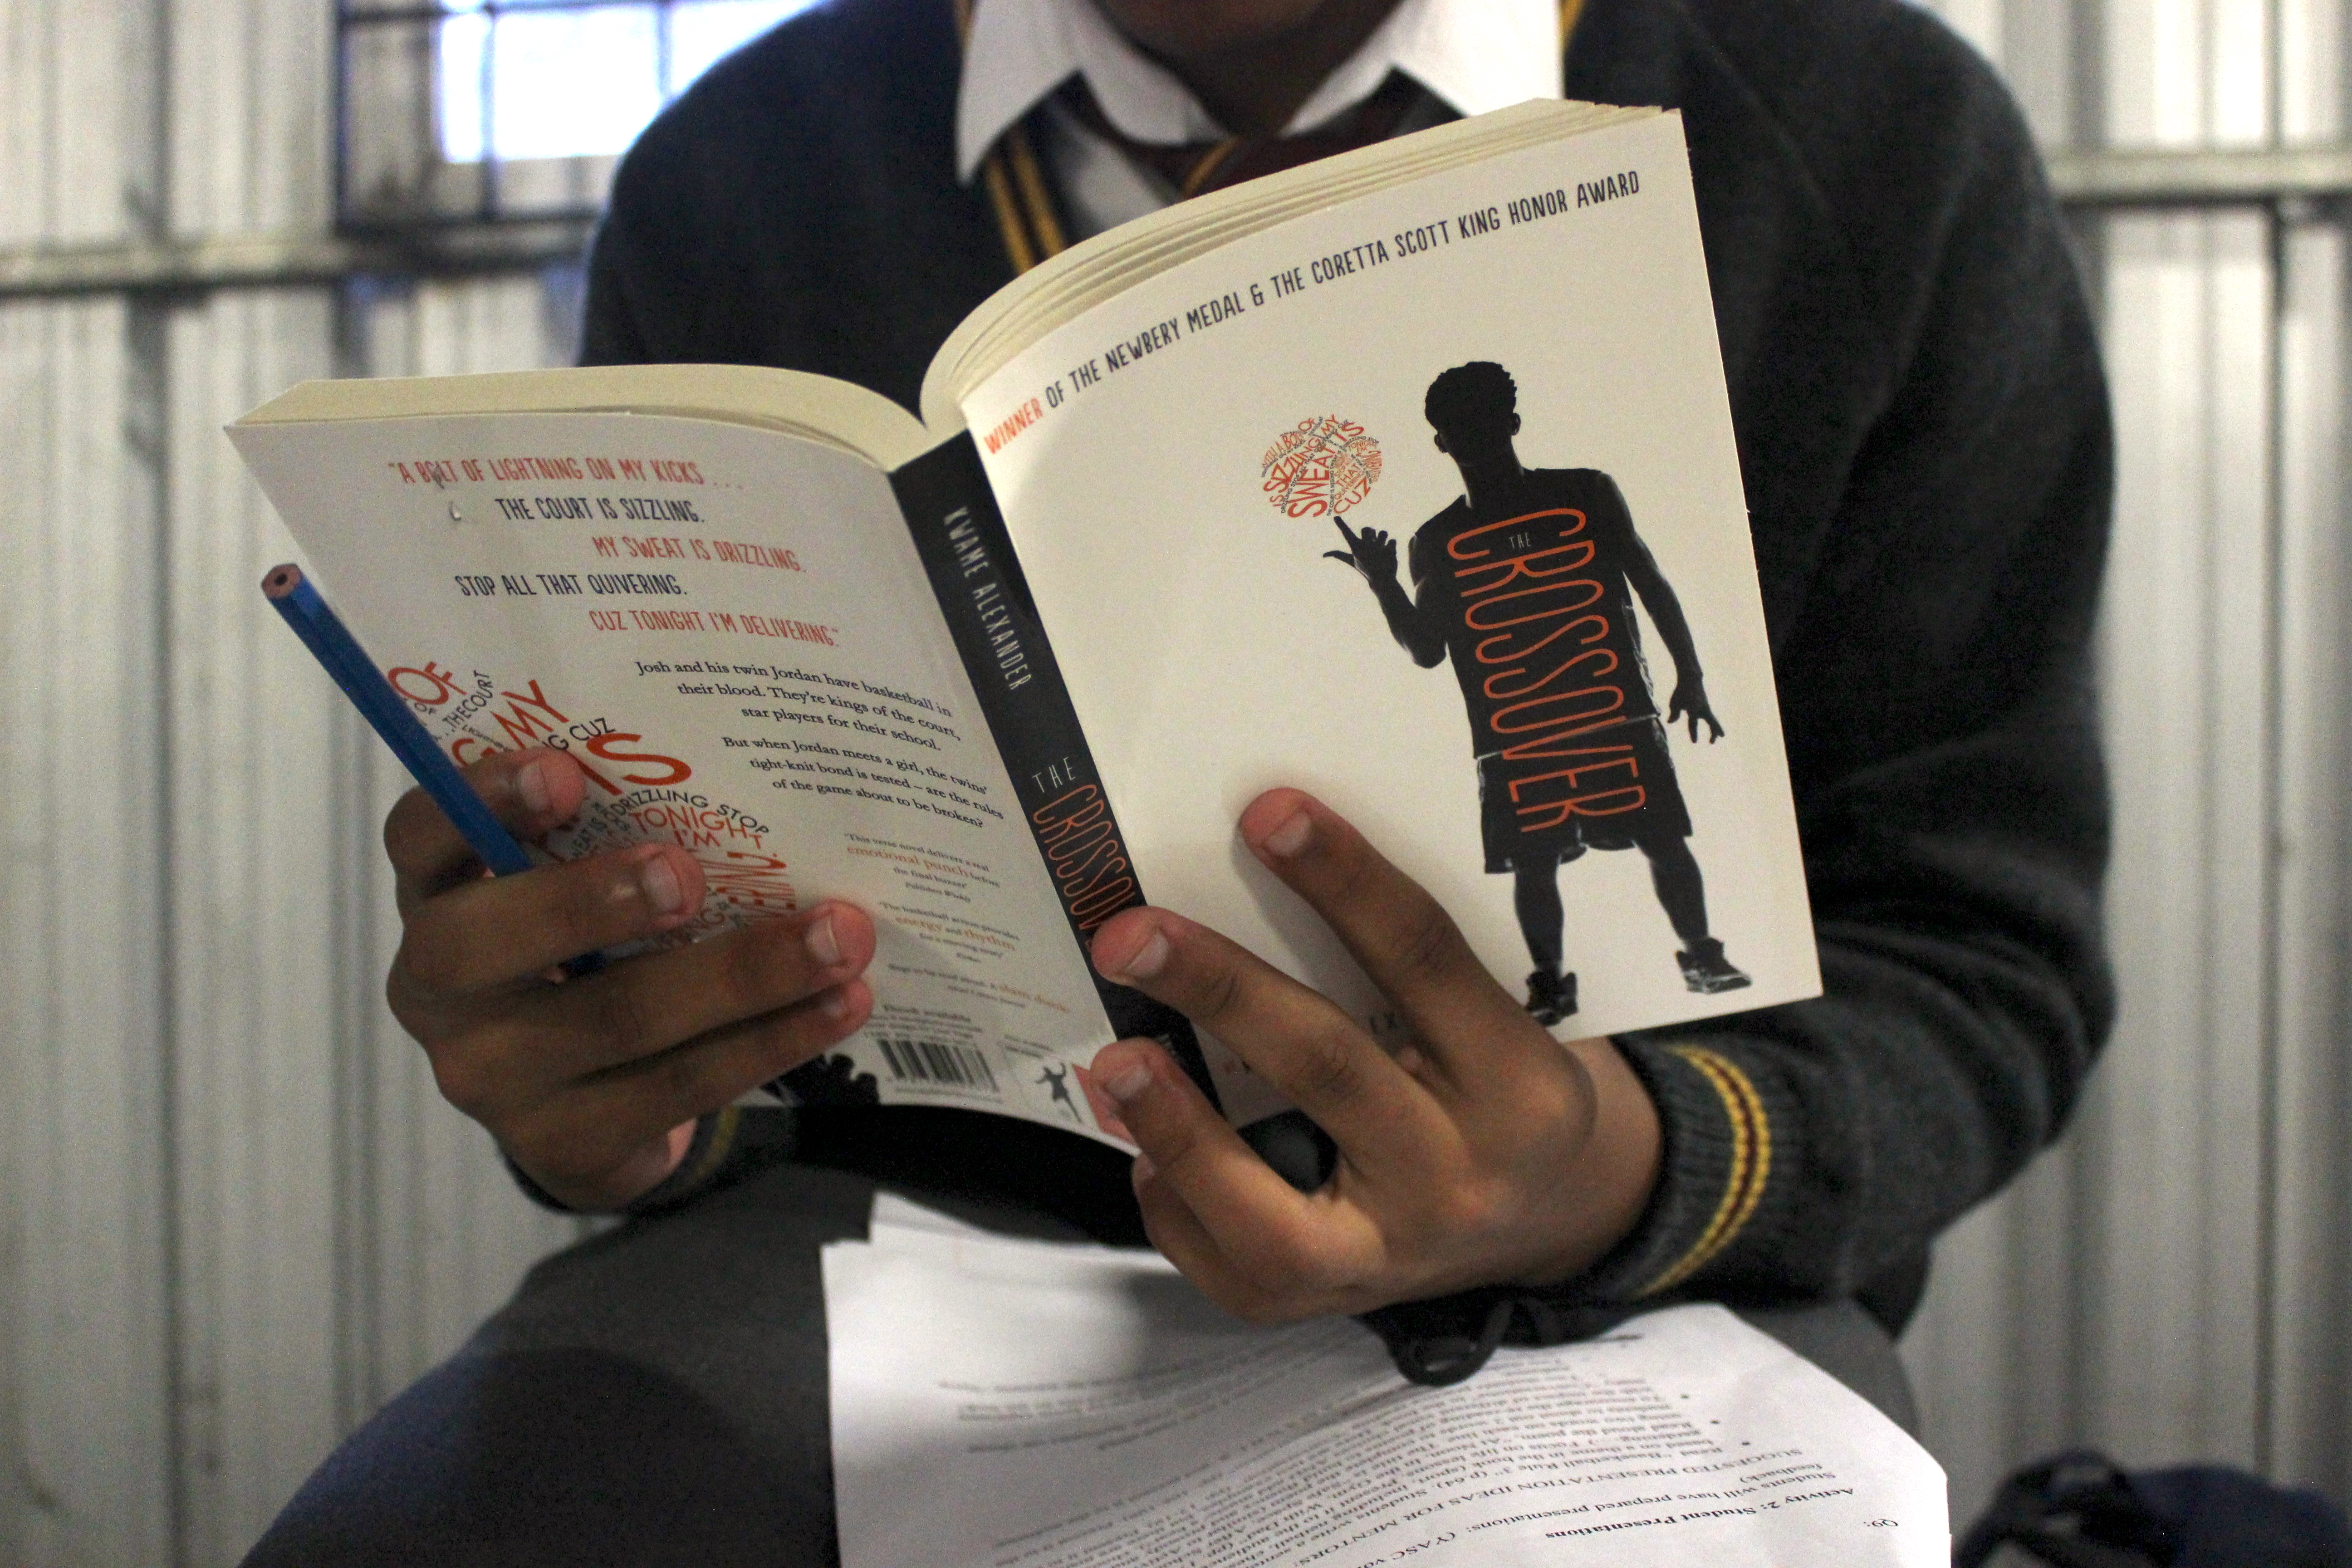 A student holds a book from the "Crossover" series.